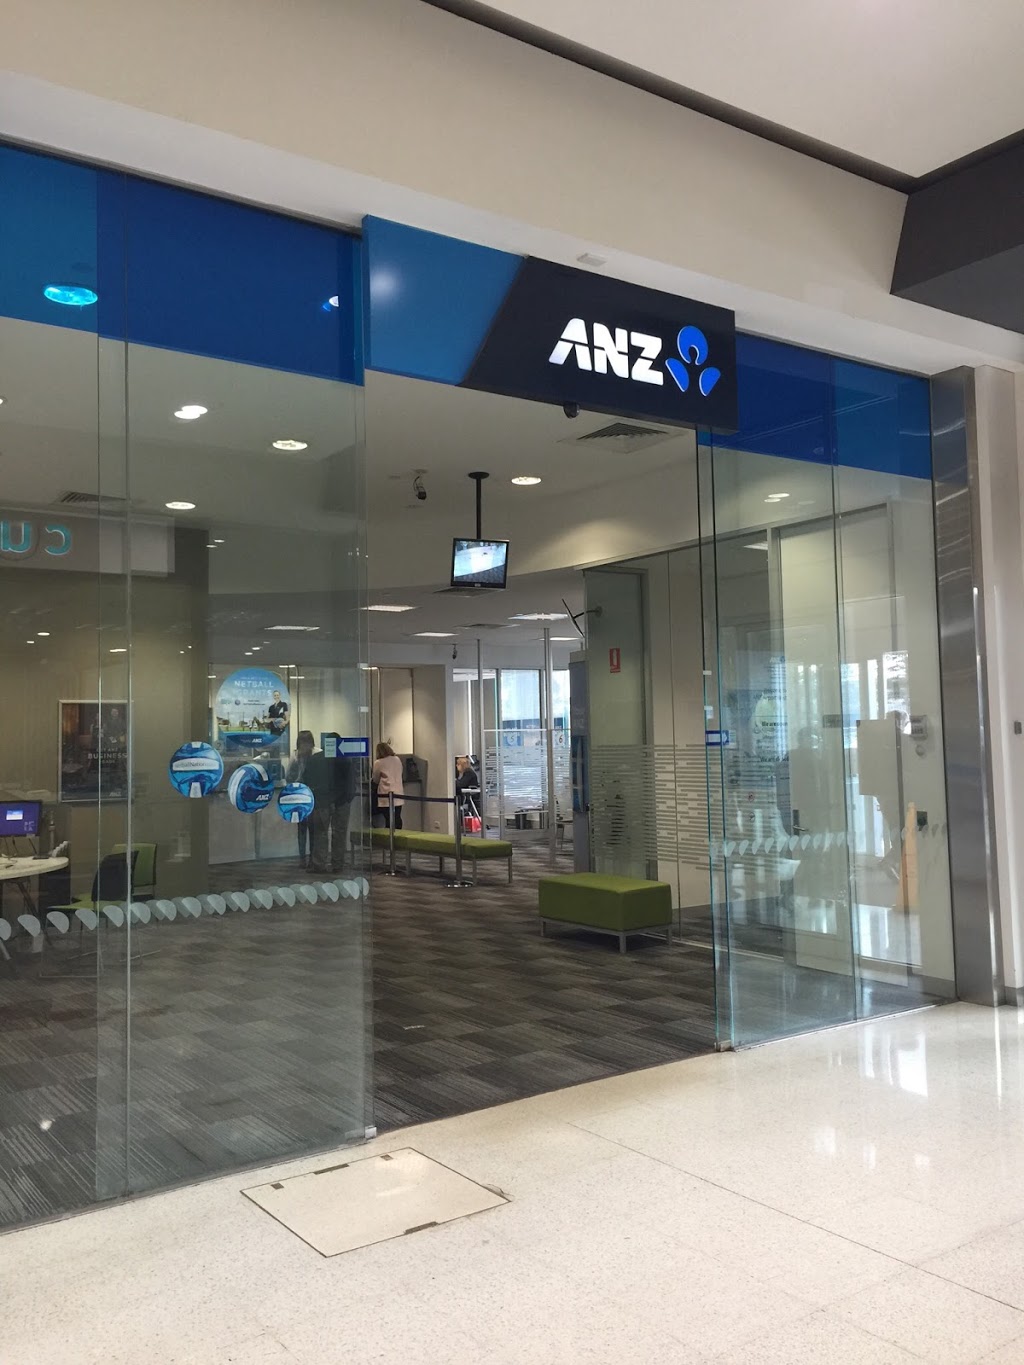 ANZ Branch Airport West | bank | 29 Louis St, Airport West VIC 3042, Australia | 131314 OR +61 131314